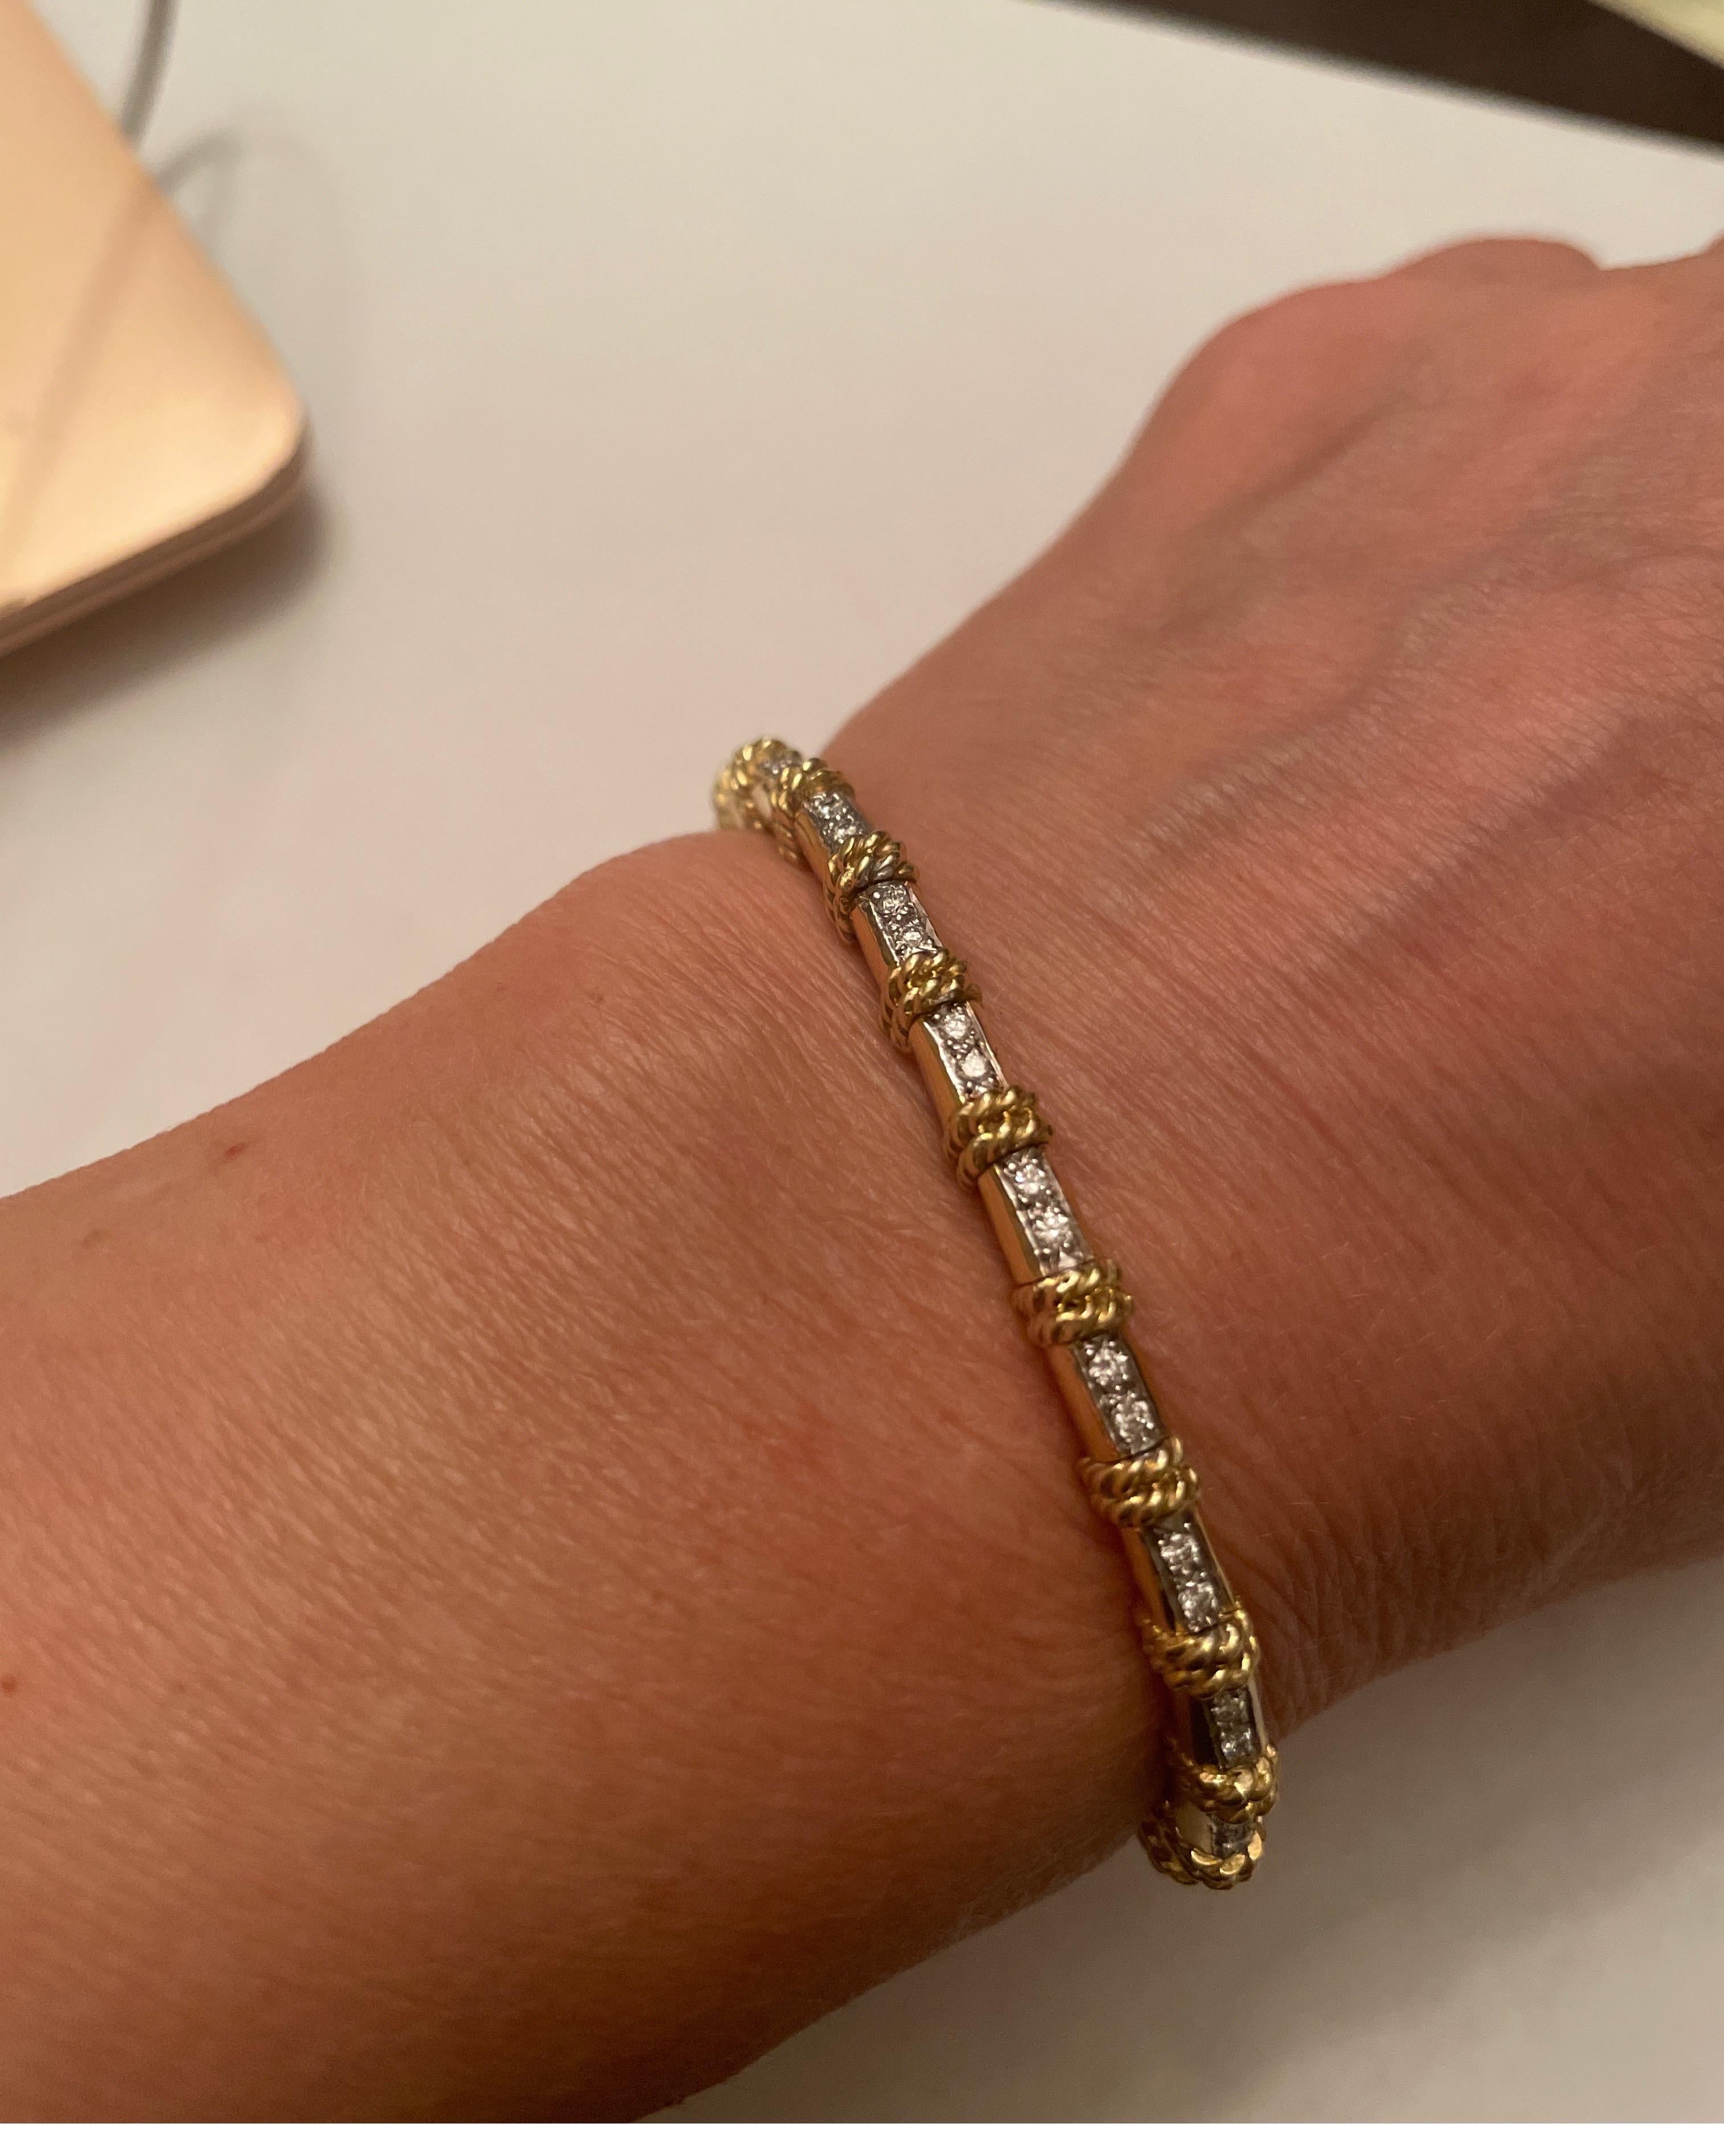 Contemporary Cassis 18 Karat Yellow Gold Diamond Bangle Bracelet with Rope Accent